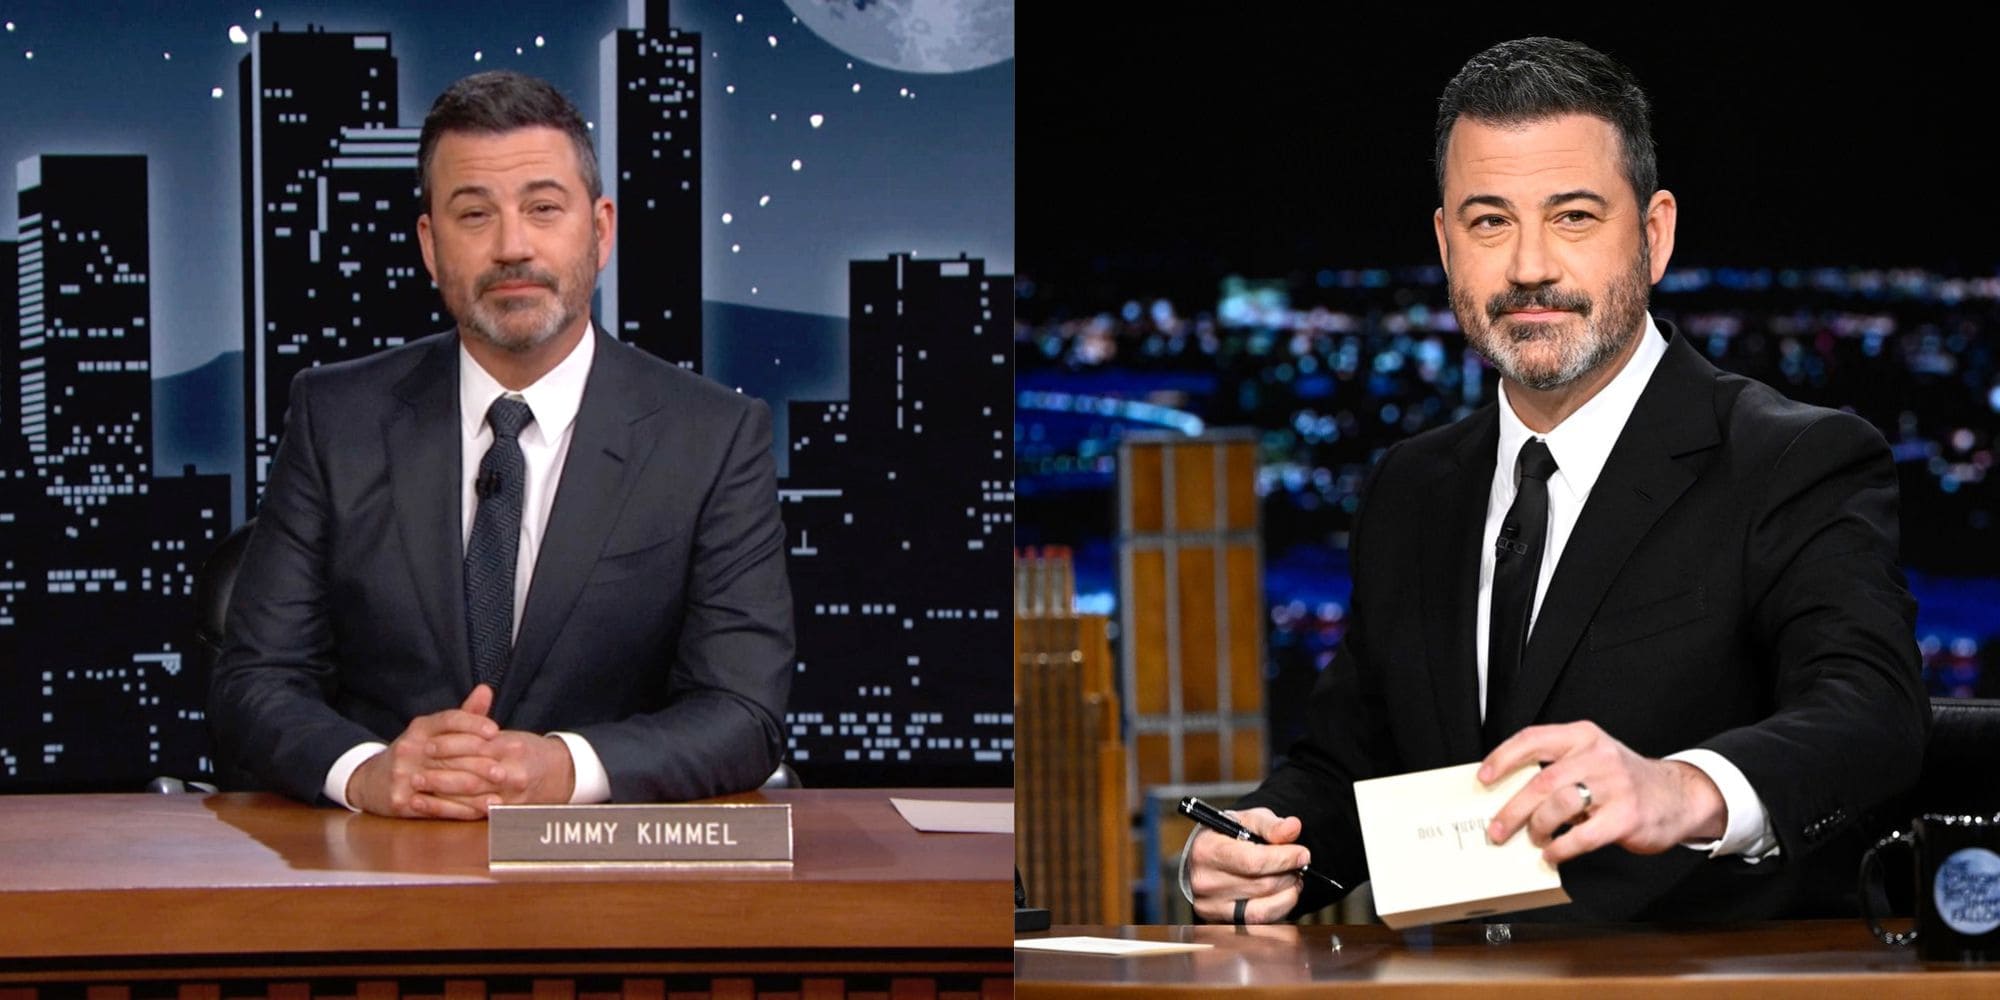 Chronology of the Feud Between Jimmy Kimmel and Aaron Rodgers: 'Karen Rodgers' Joke, Epstein List Claims, and Beyond